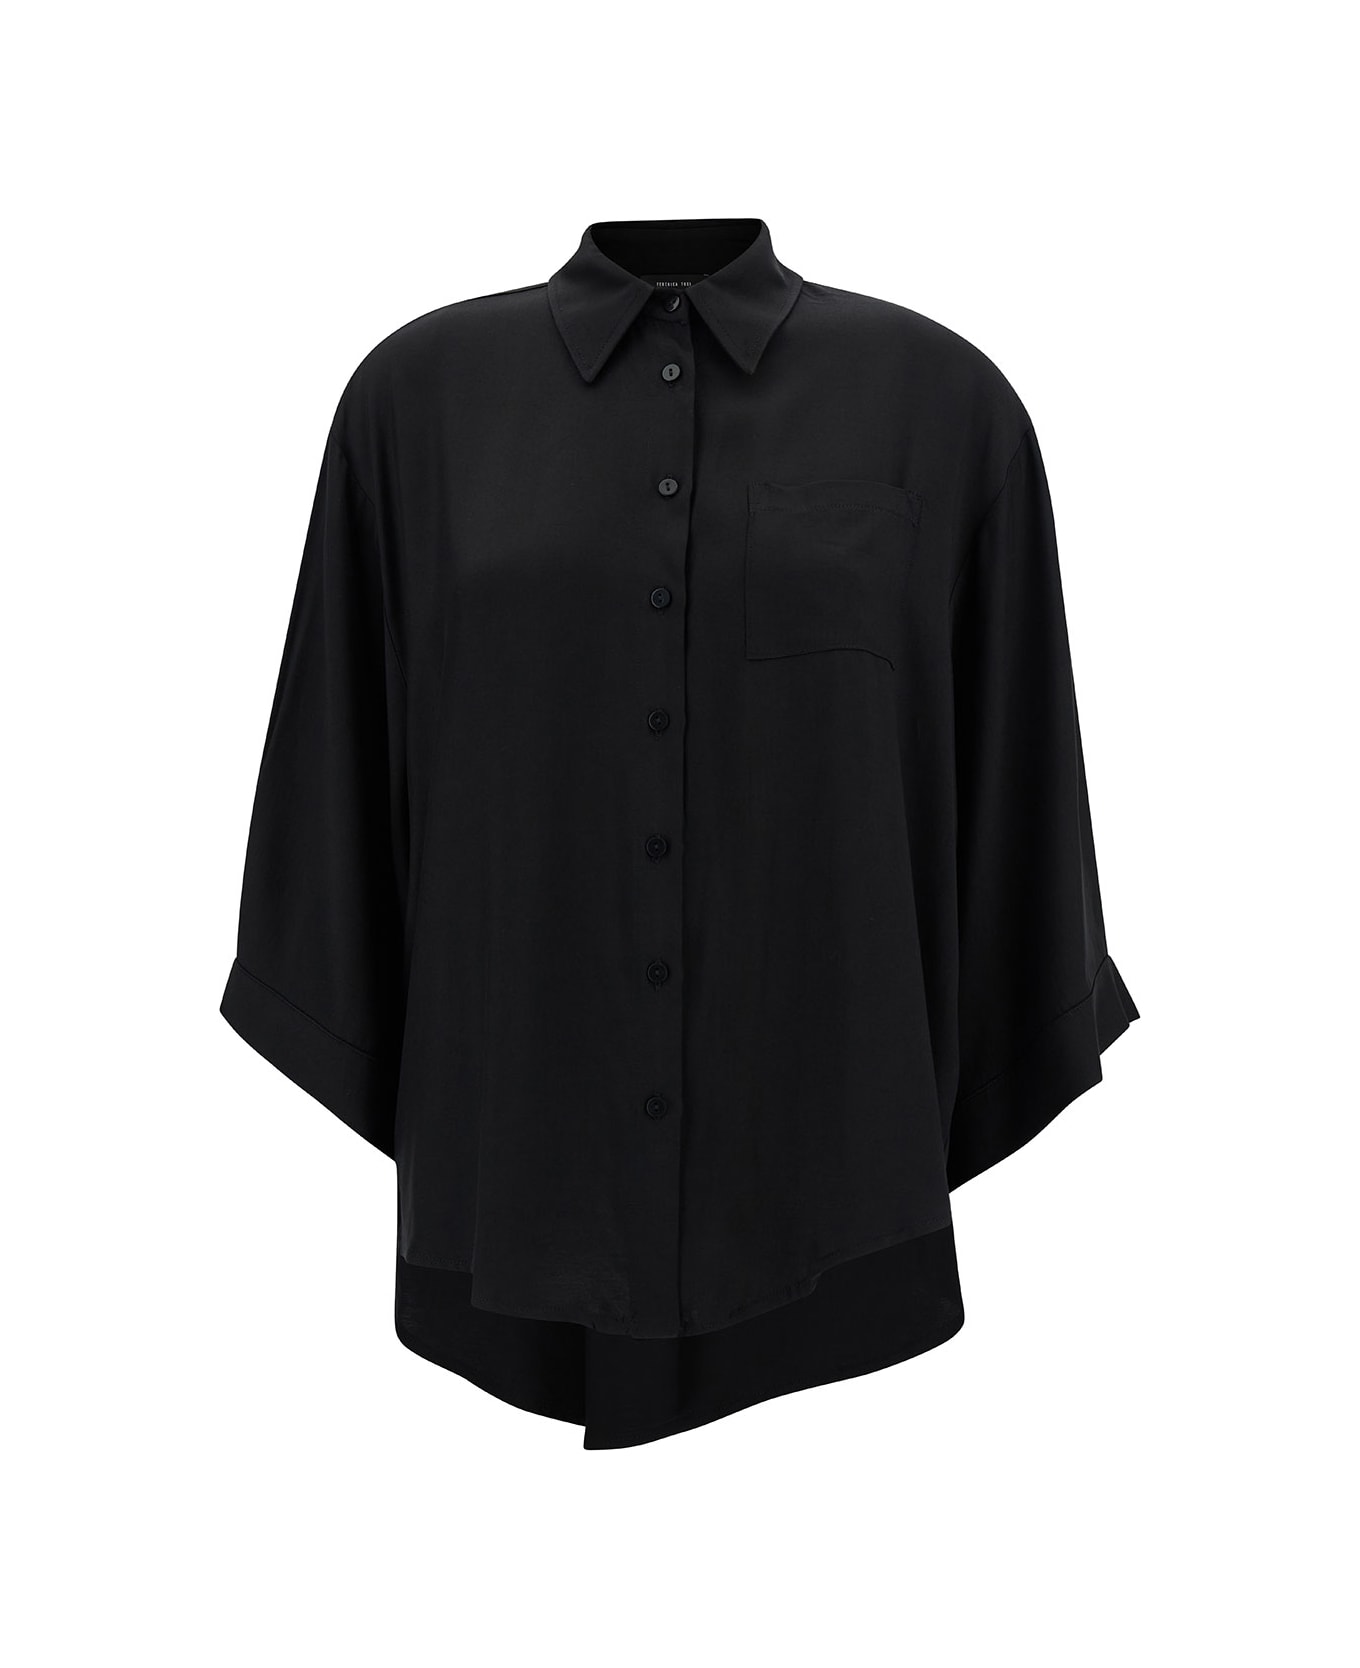 Federica Tosi Oversized Black Shirt With Patch Pockets In Viscose Woman - Black シャツ